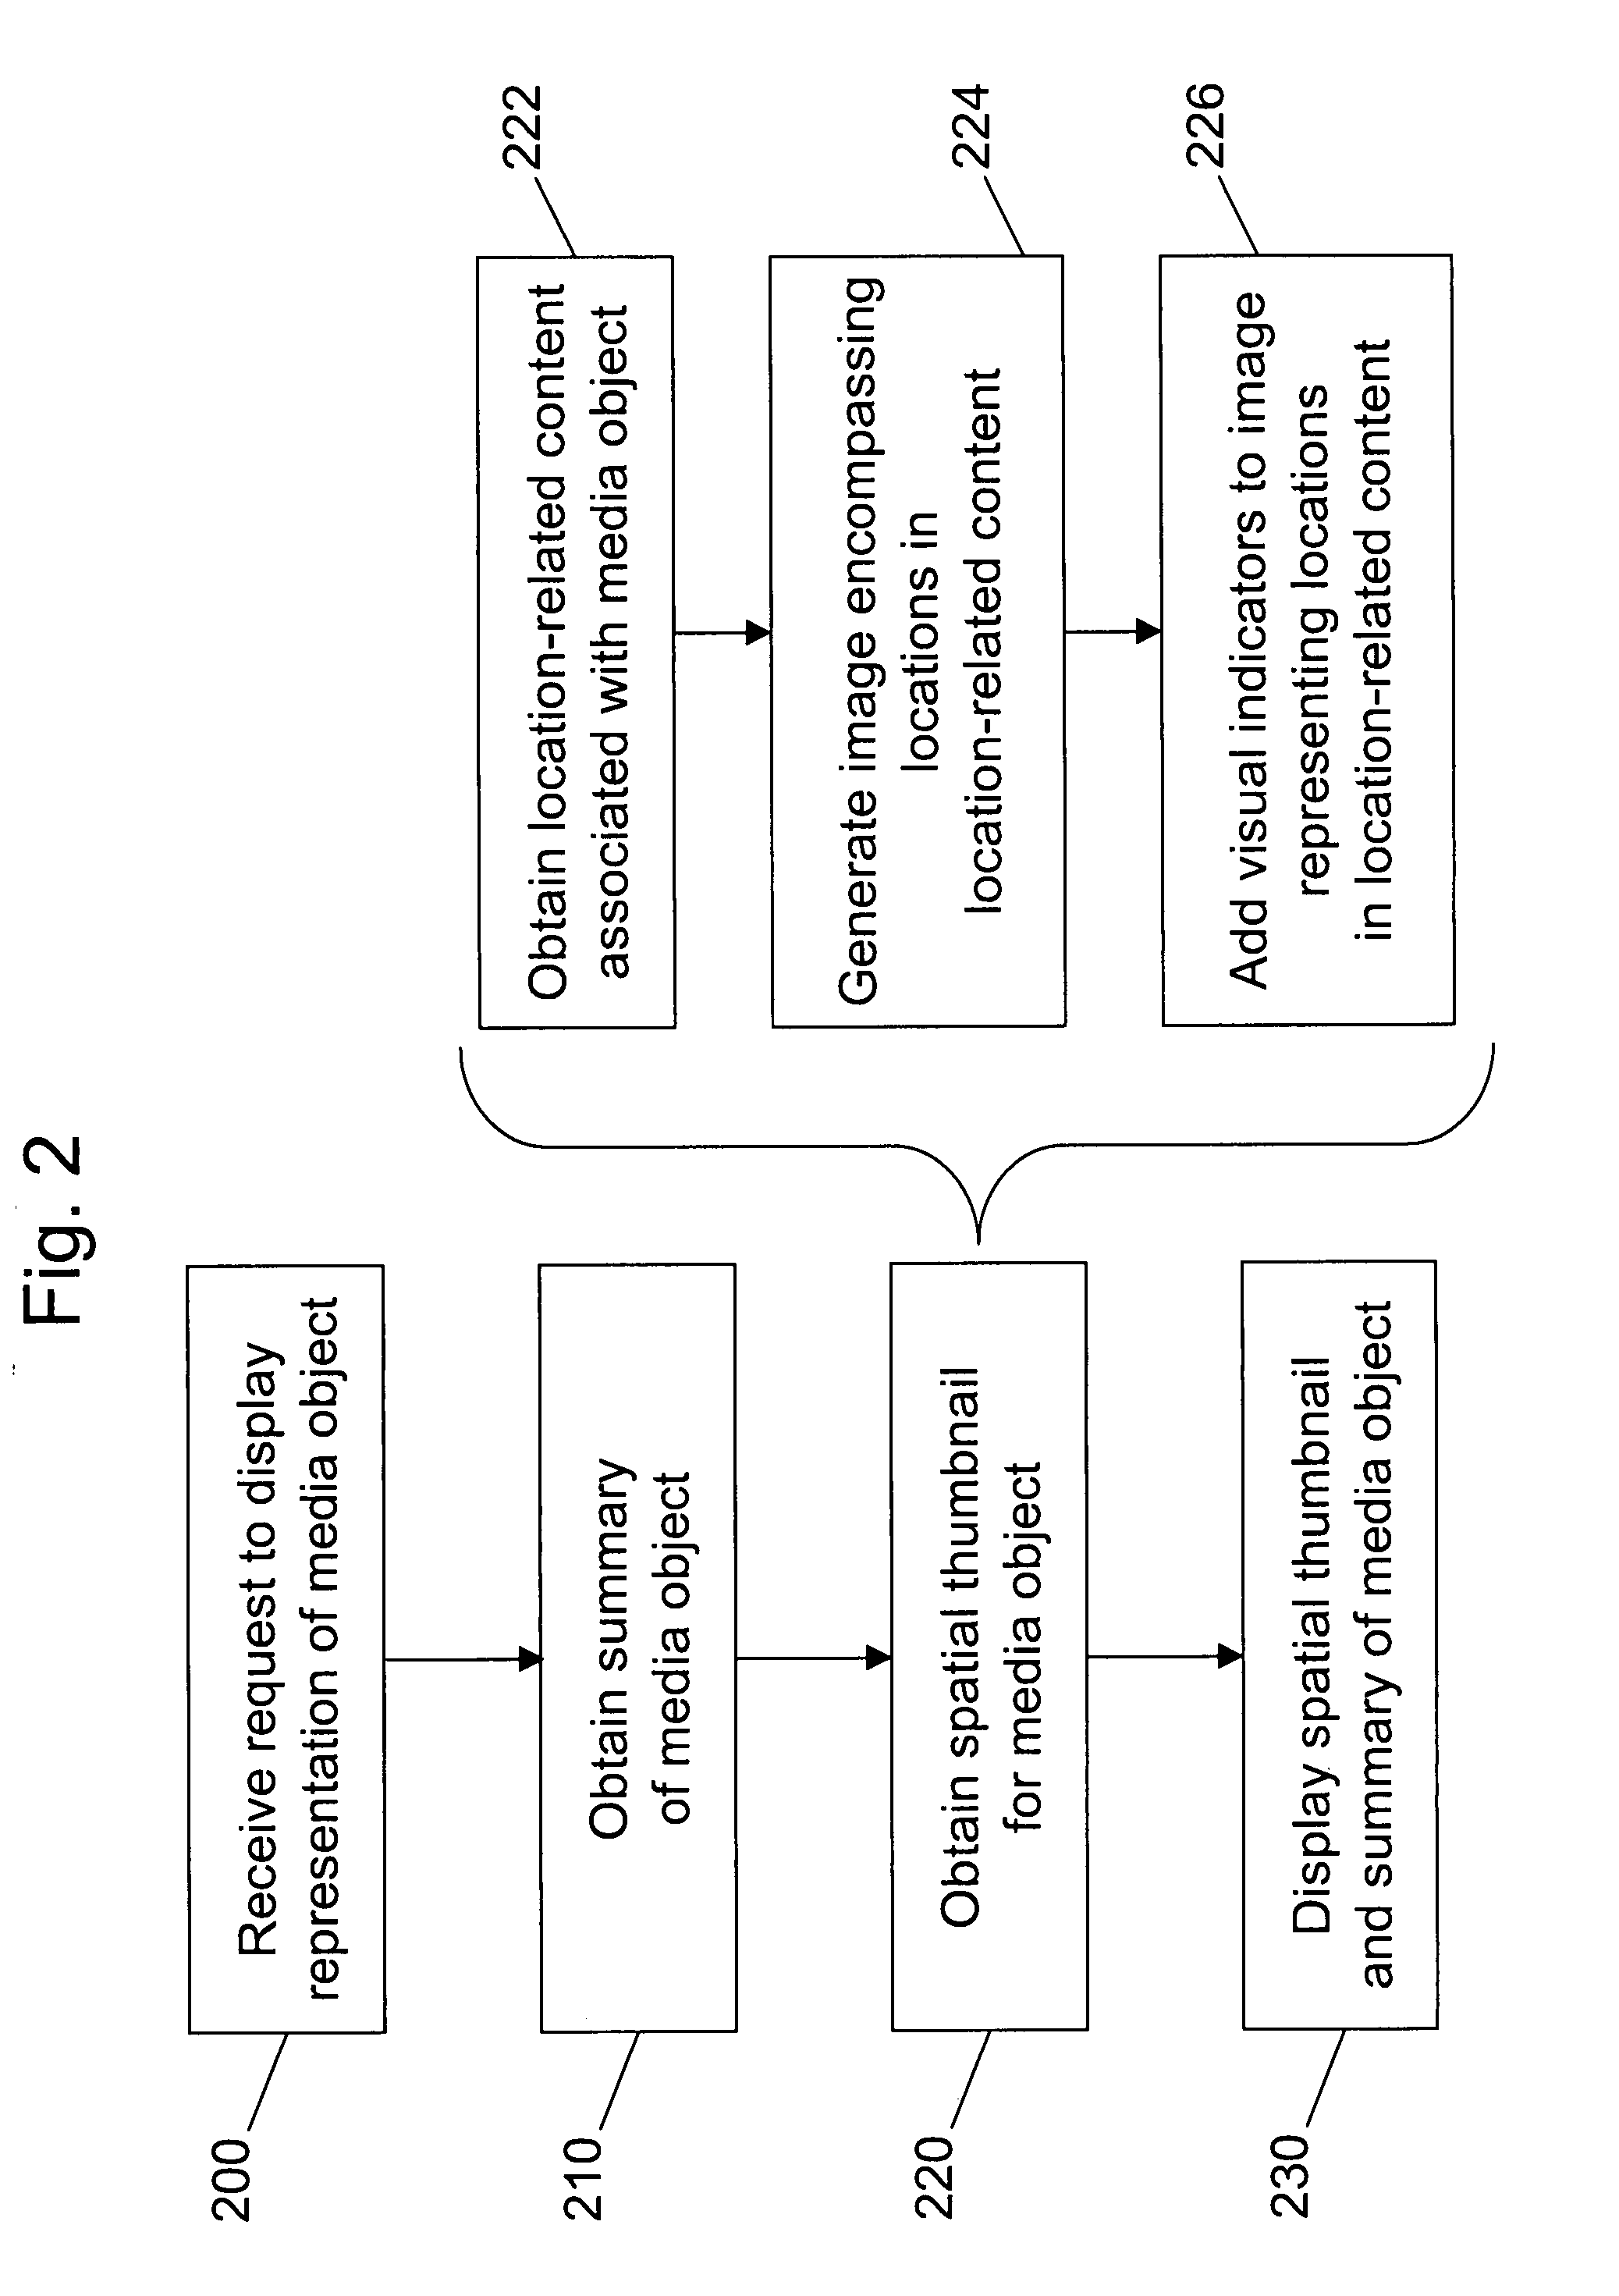 Systems and methods for spatial thumbnails and companion maps for media objects